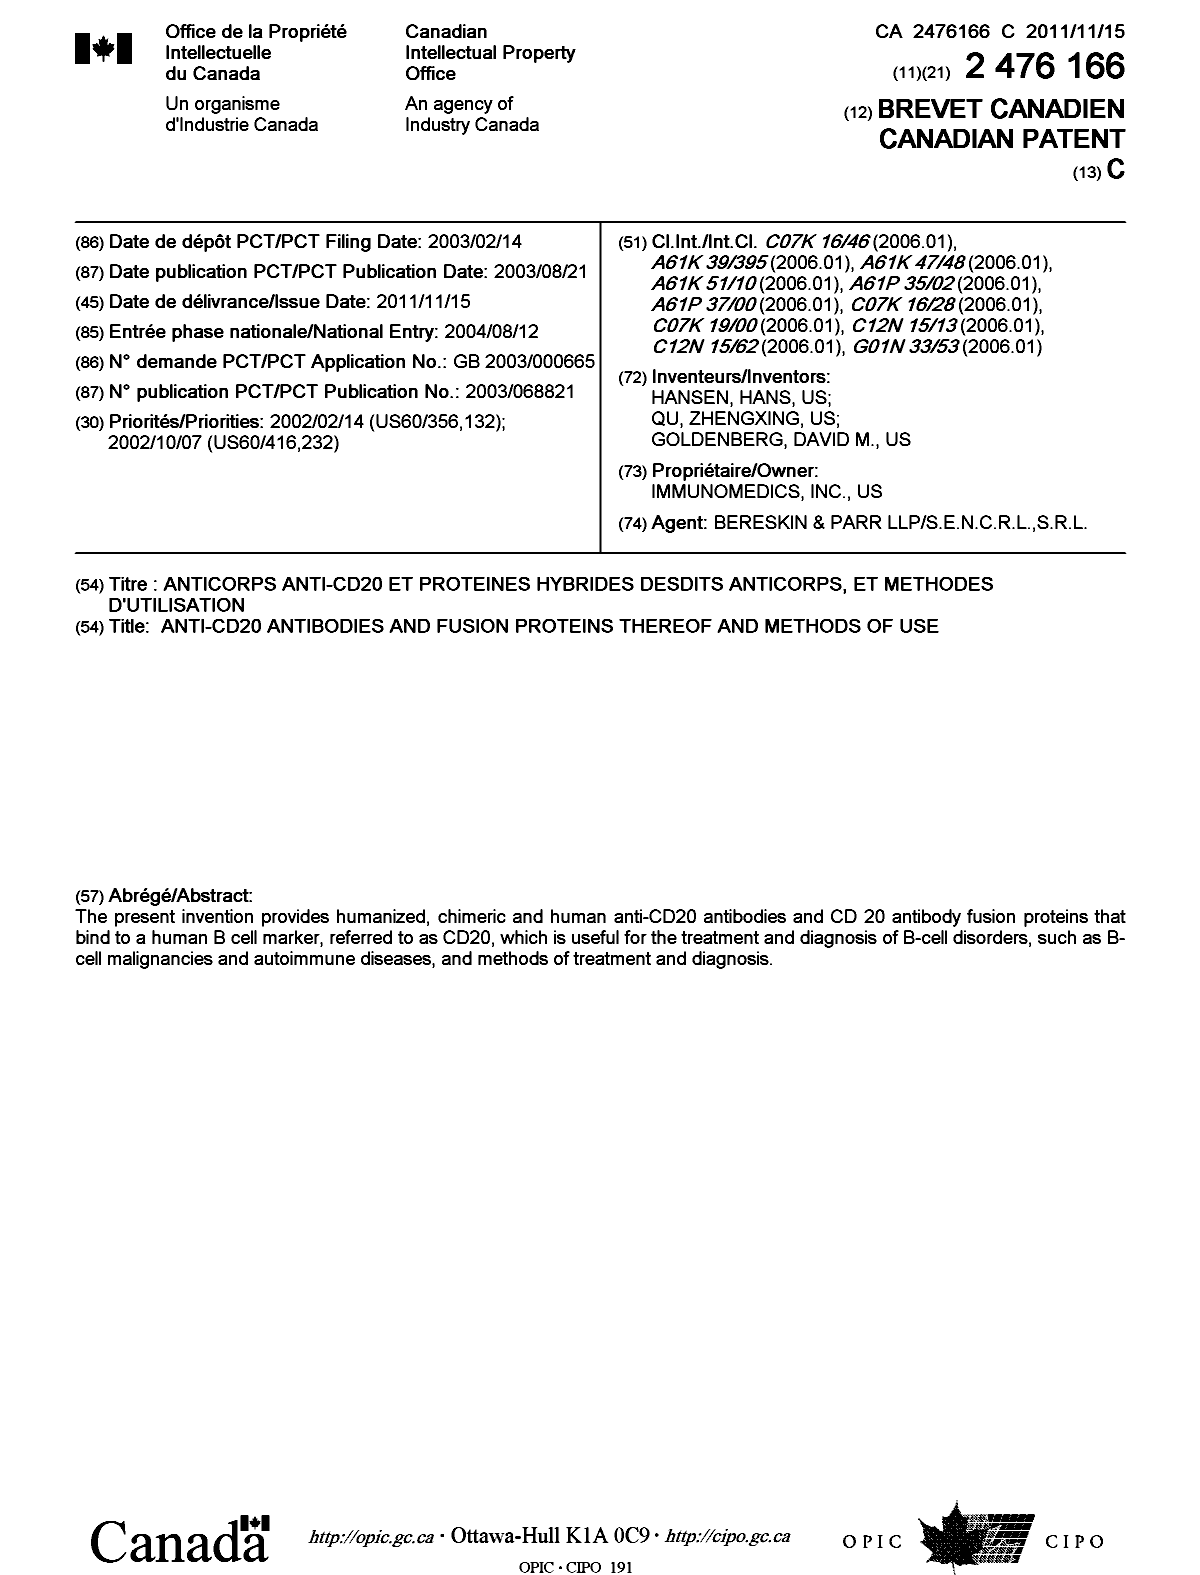 Canadian Patent Document 2476166. Cover Page 20111012. Image 1 of 1